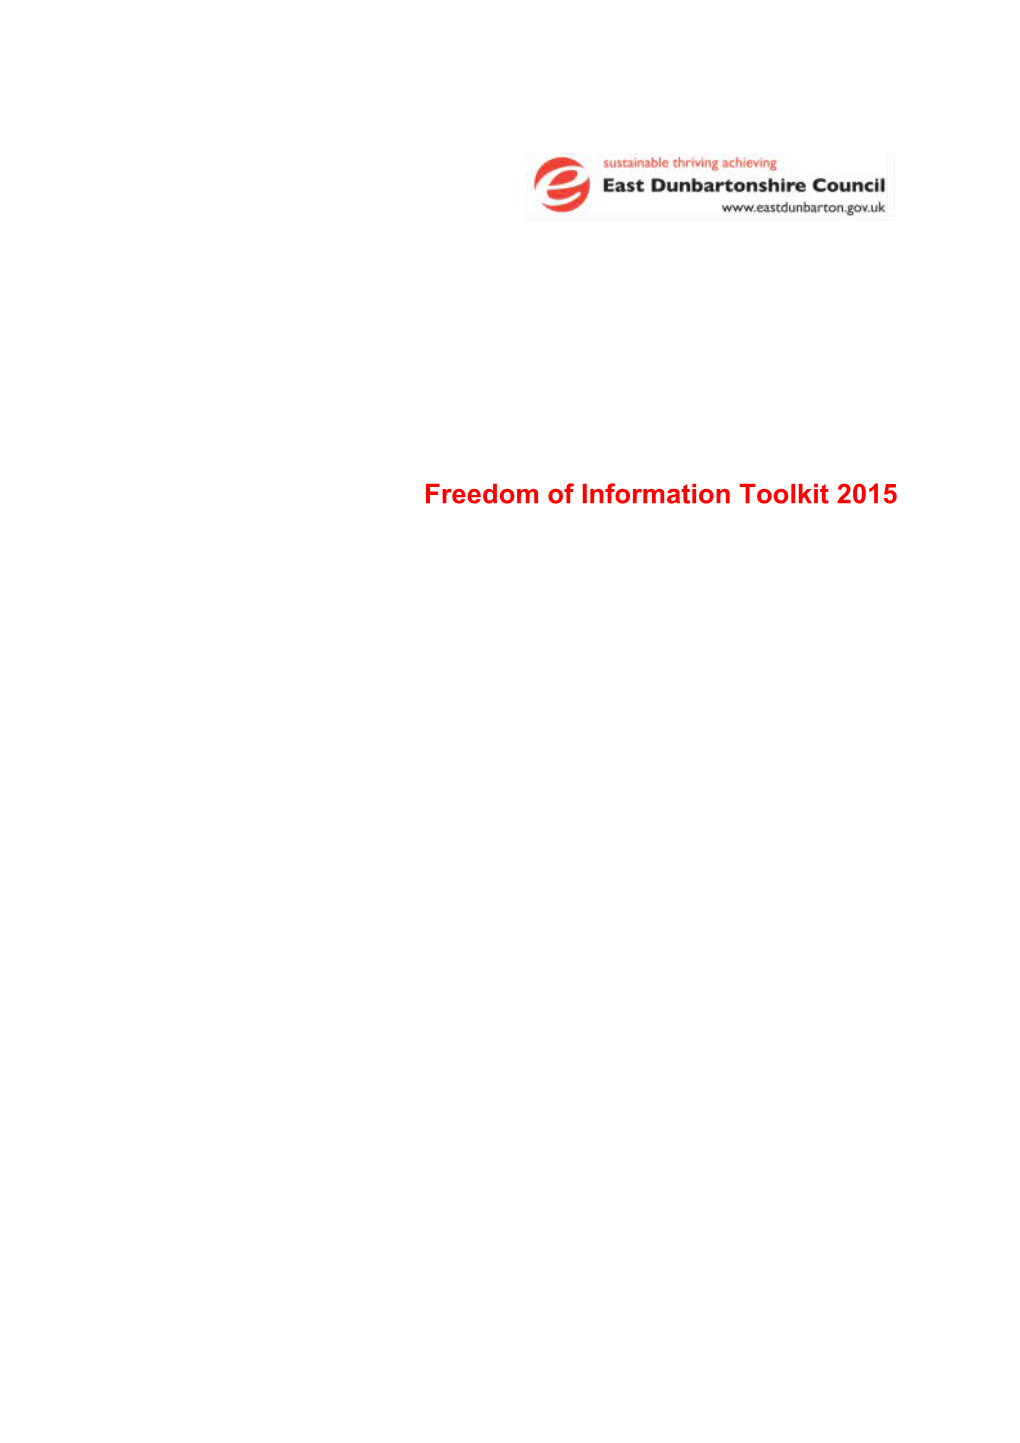 Freedom of Information Toolkit 2015